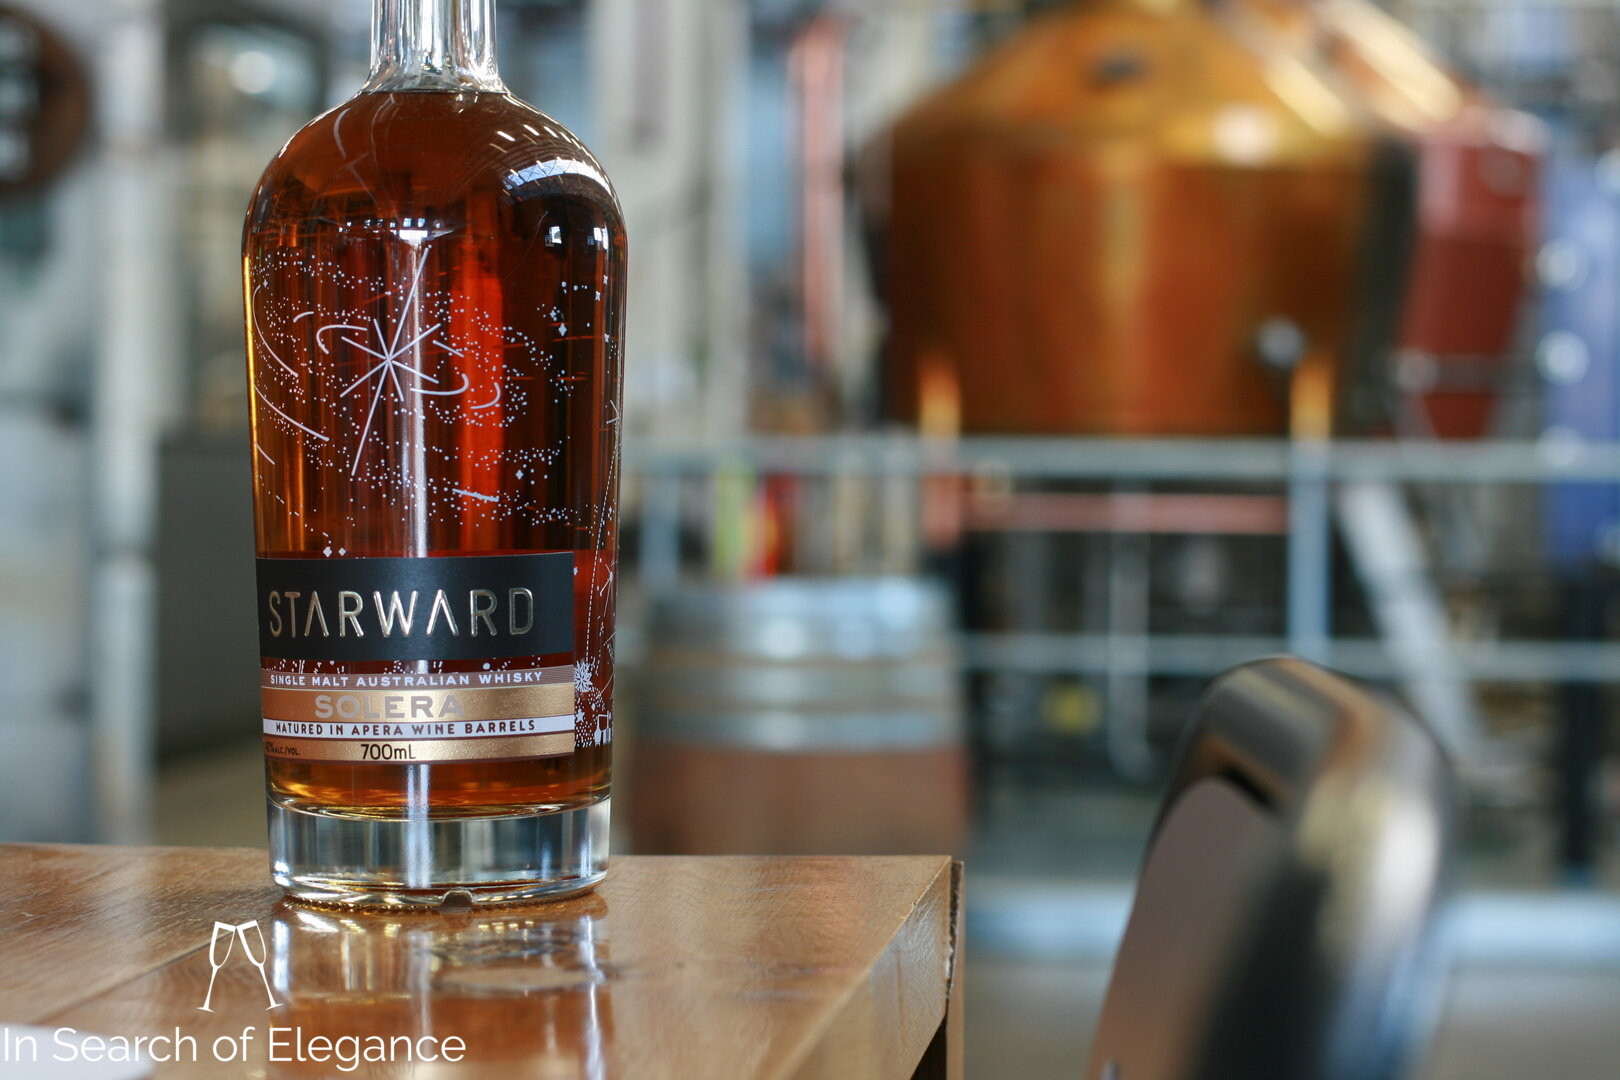 Starward Solera with the stills in the background. Photo taken by yours truly - a real camera does a bit more than the usual iPhone shot!